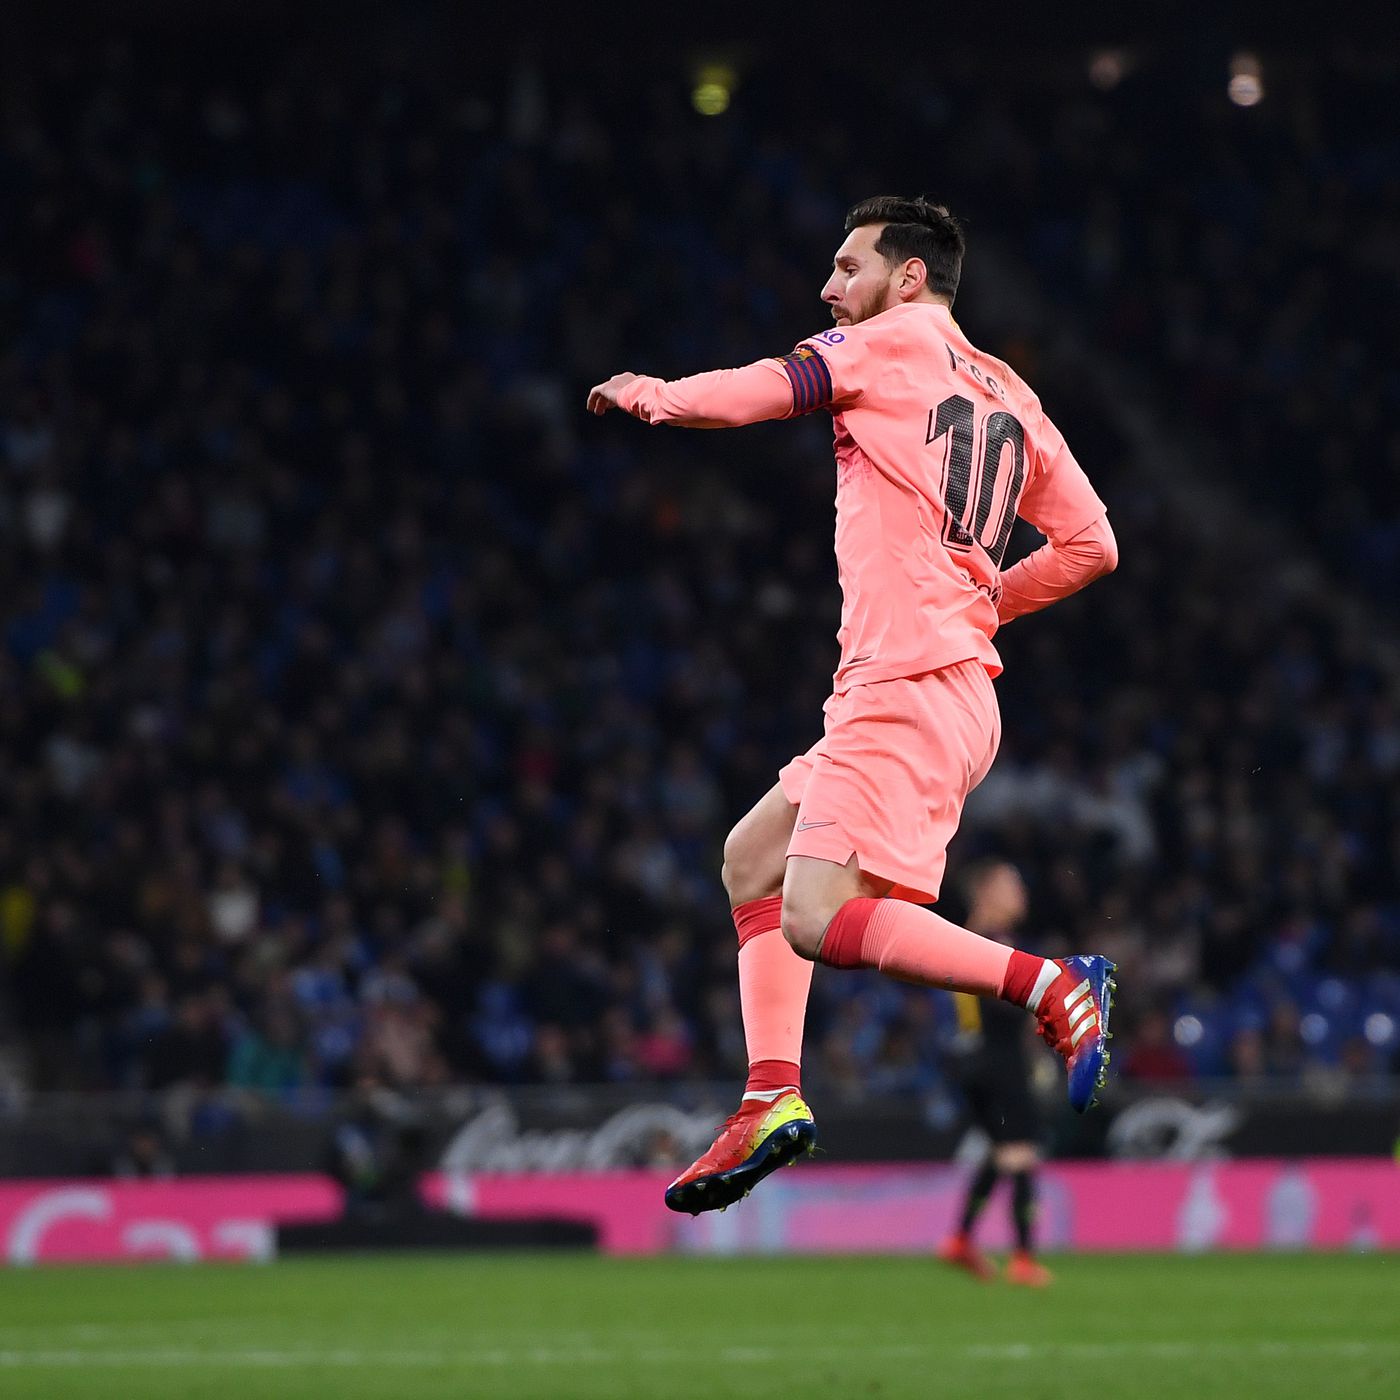 Lionel Messi's free-kick record is just ridiculous - Barca Blaugranes